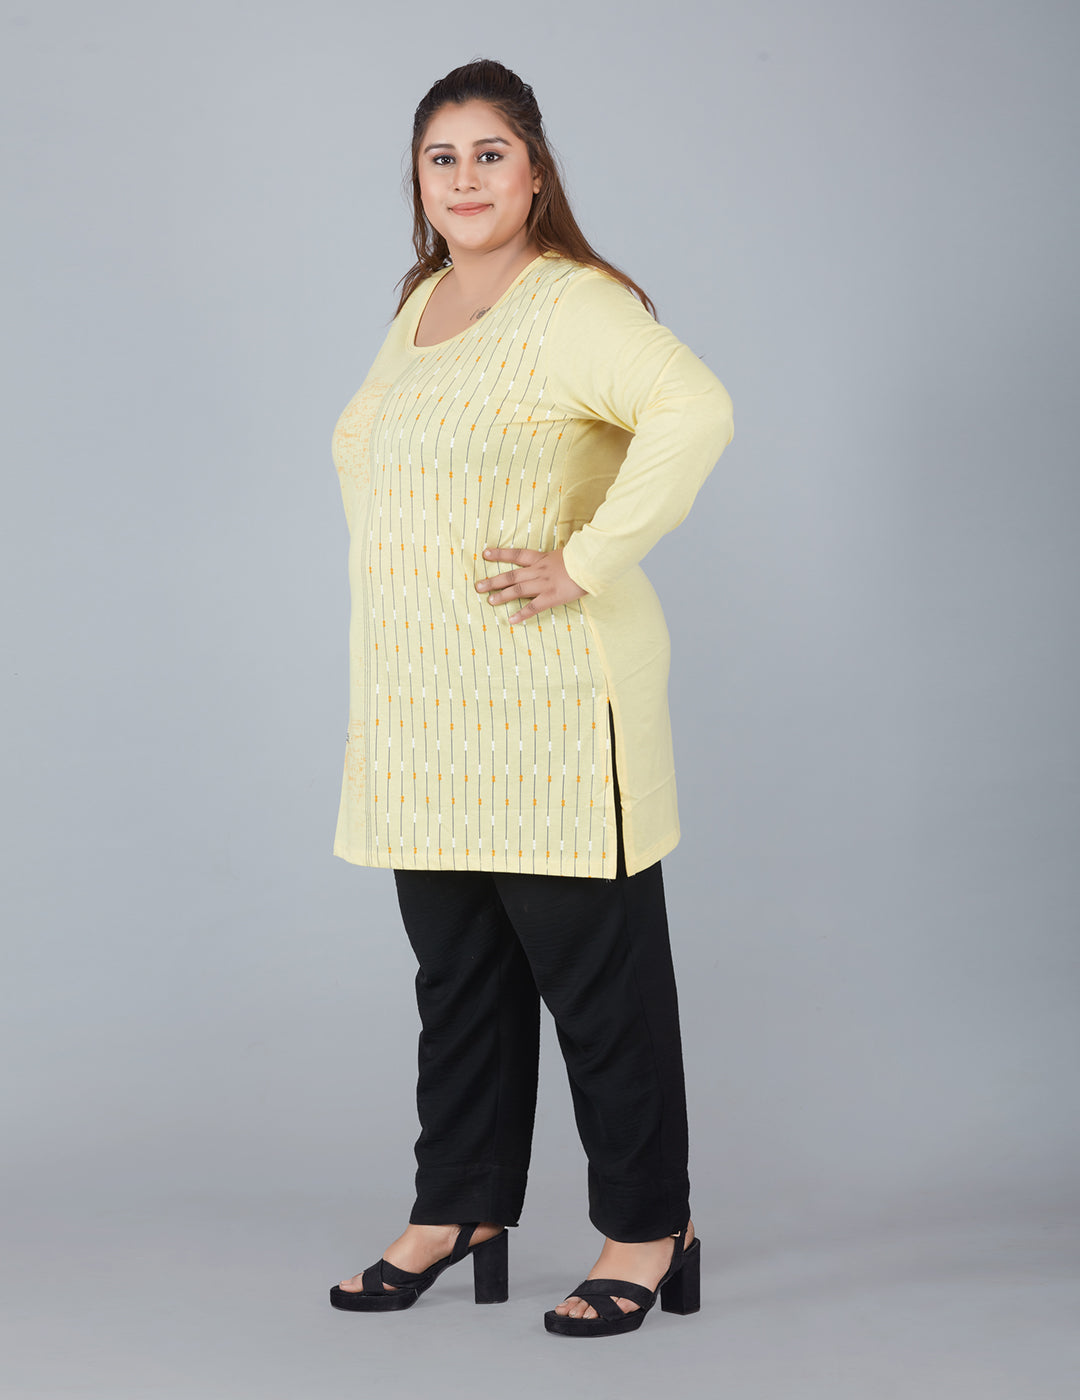 Cotton Long Top for Women Plus Size - Full Sleeve - Yellow